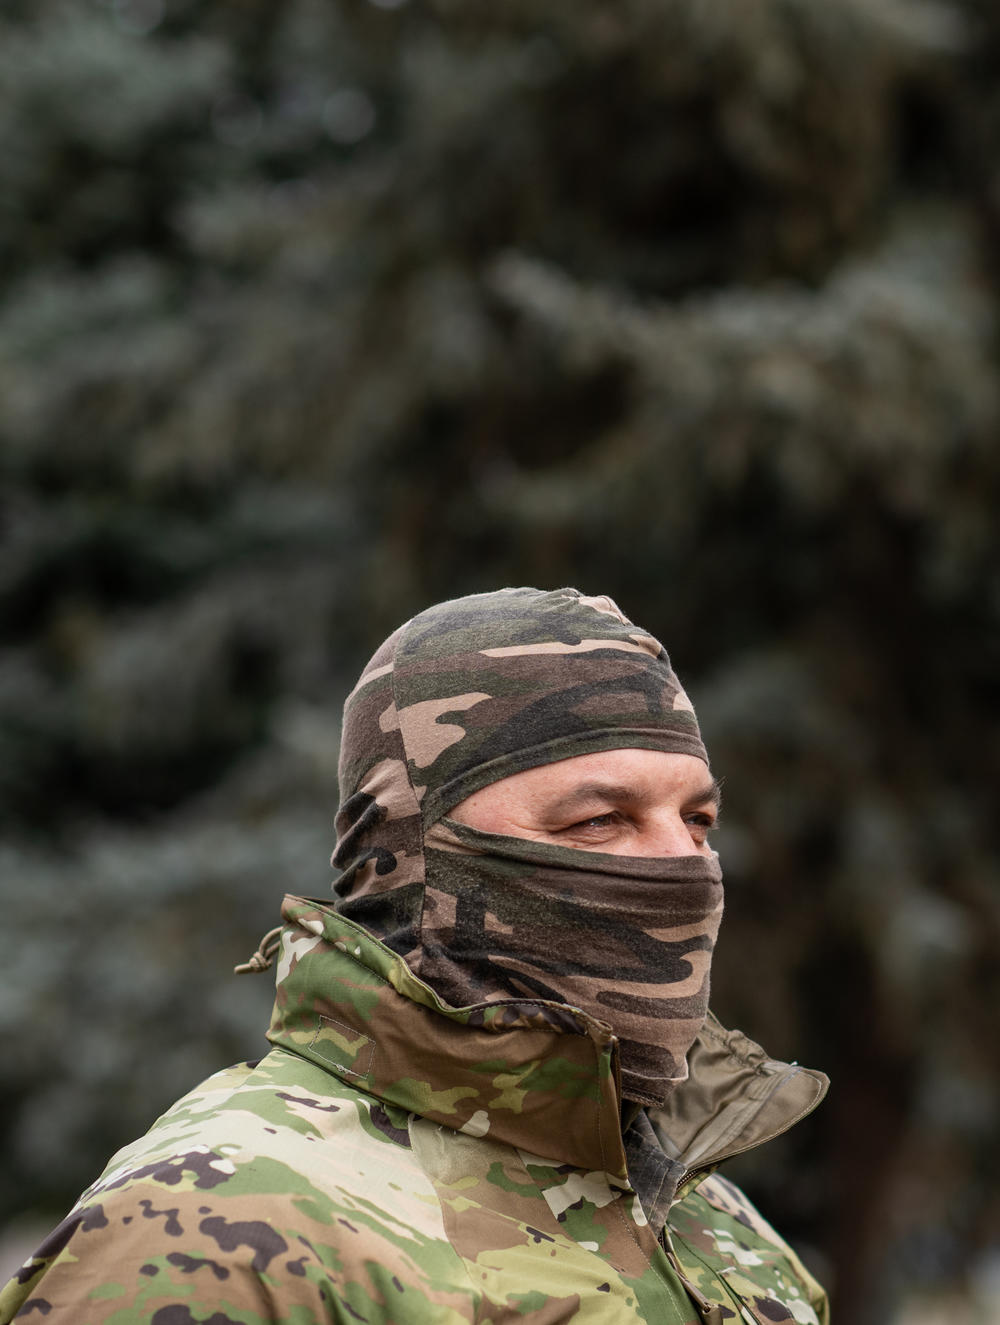 Serhiy, a soldier who cannot show his face or reveal his last name as he has family in occupied territory, poses in a park in Kherson, Ukraine. He had used information given by local civilians to target Russian forces during the occupation of Kherson.